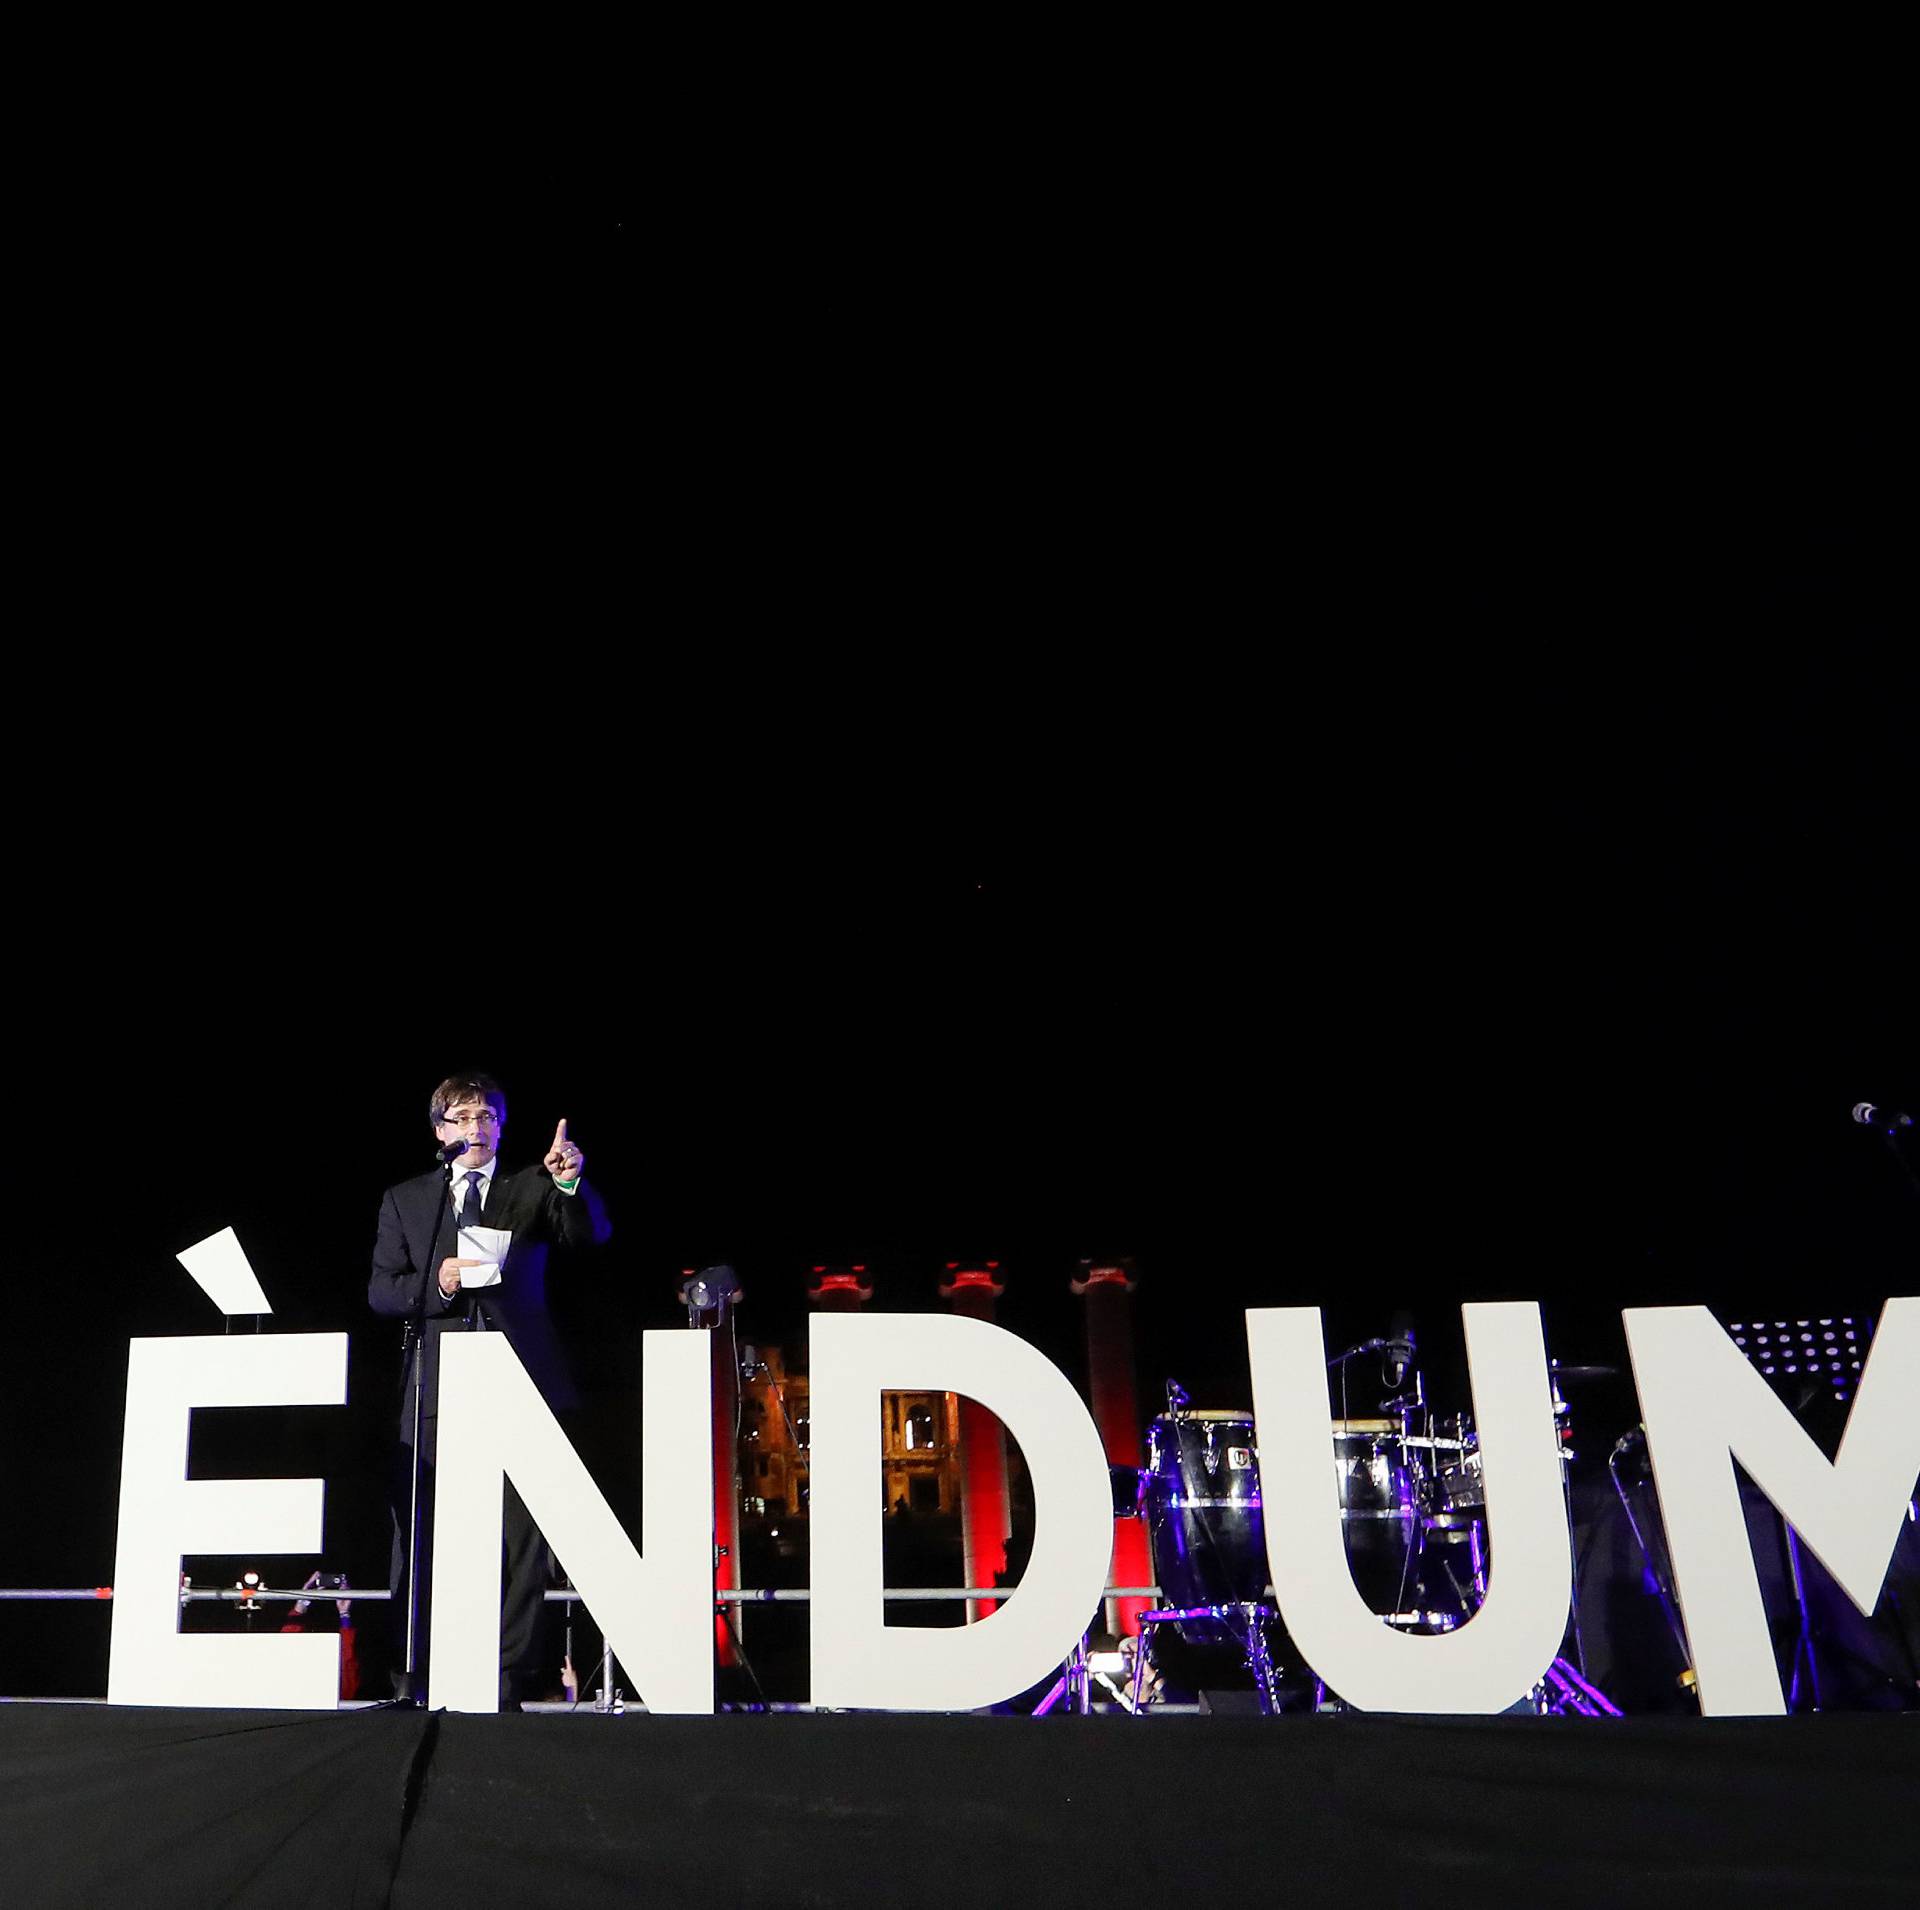 Catalan President Carles Puigdemont addresses the crowd of people attending a closing rally in favour of the banned October 1 independence referendum in Barcelona